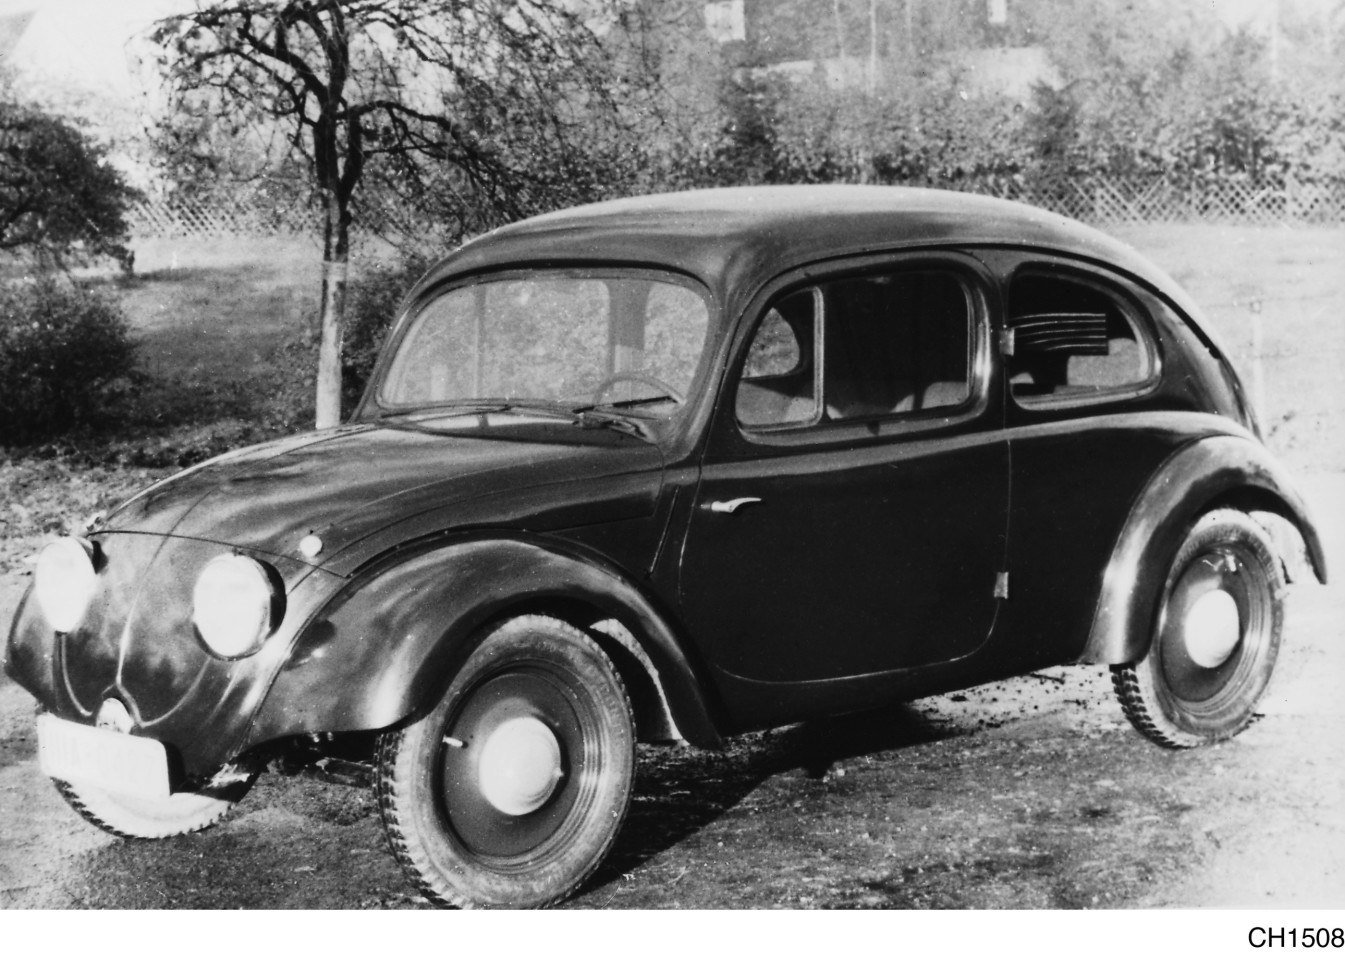 A prototype Beetle from the year 1935/36